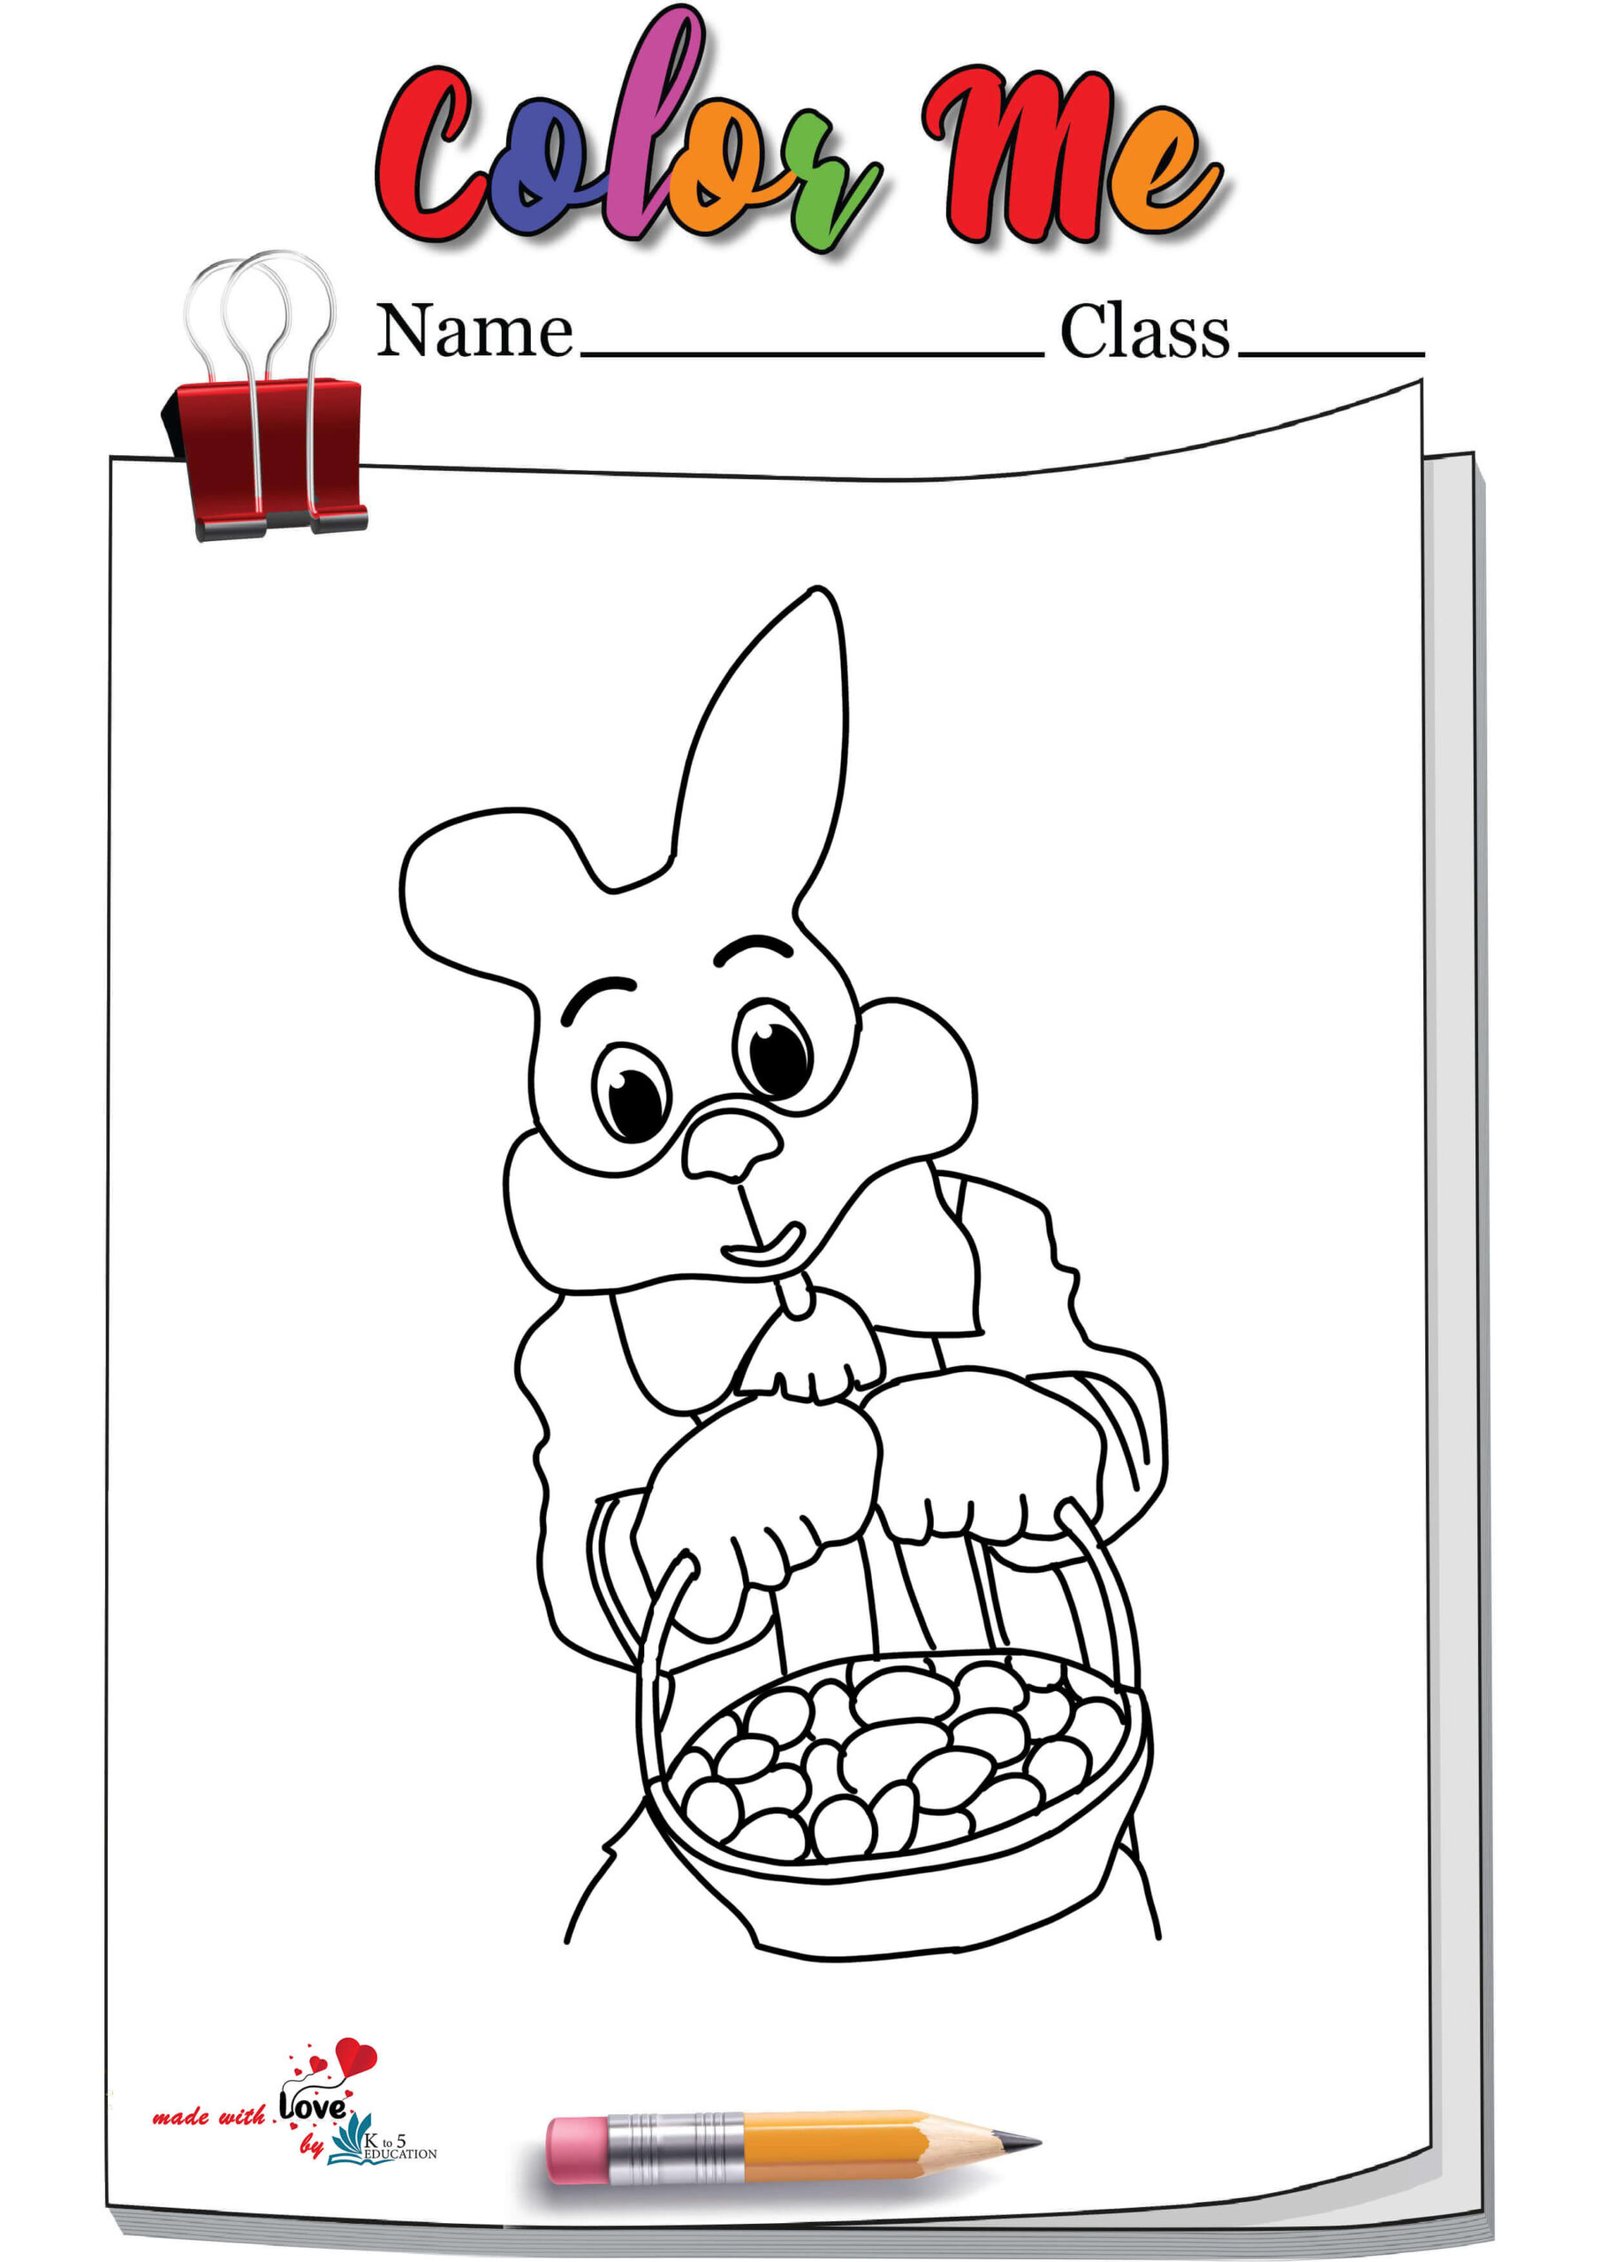 Easter Bunny At Quail Springs Mall Coloring Page